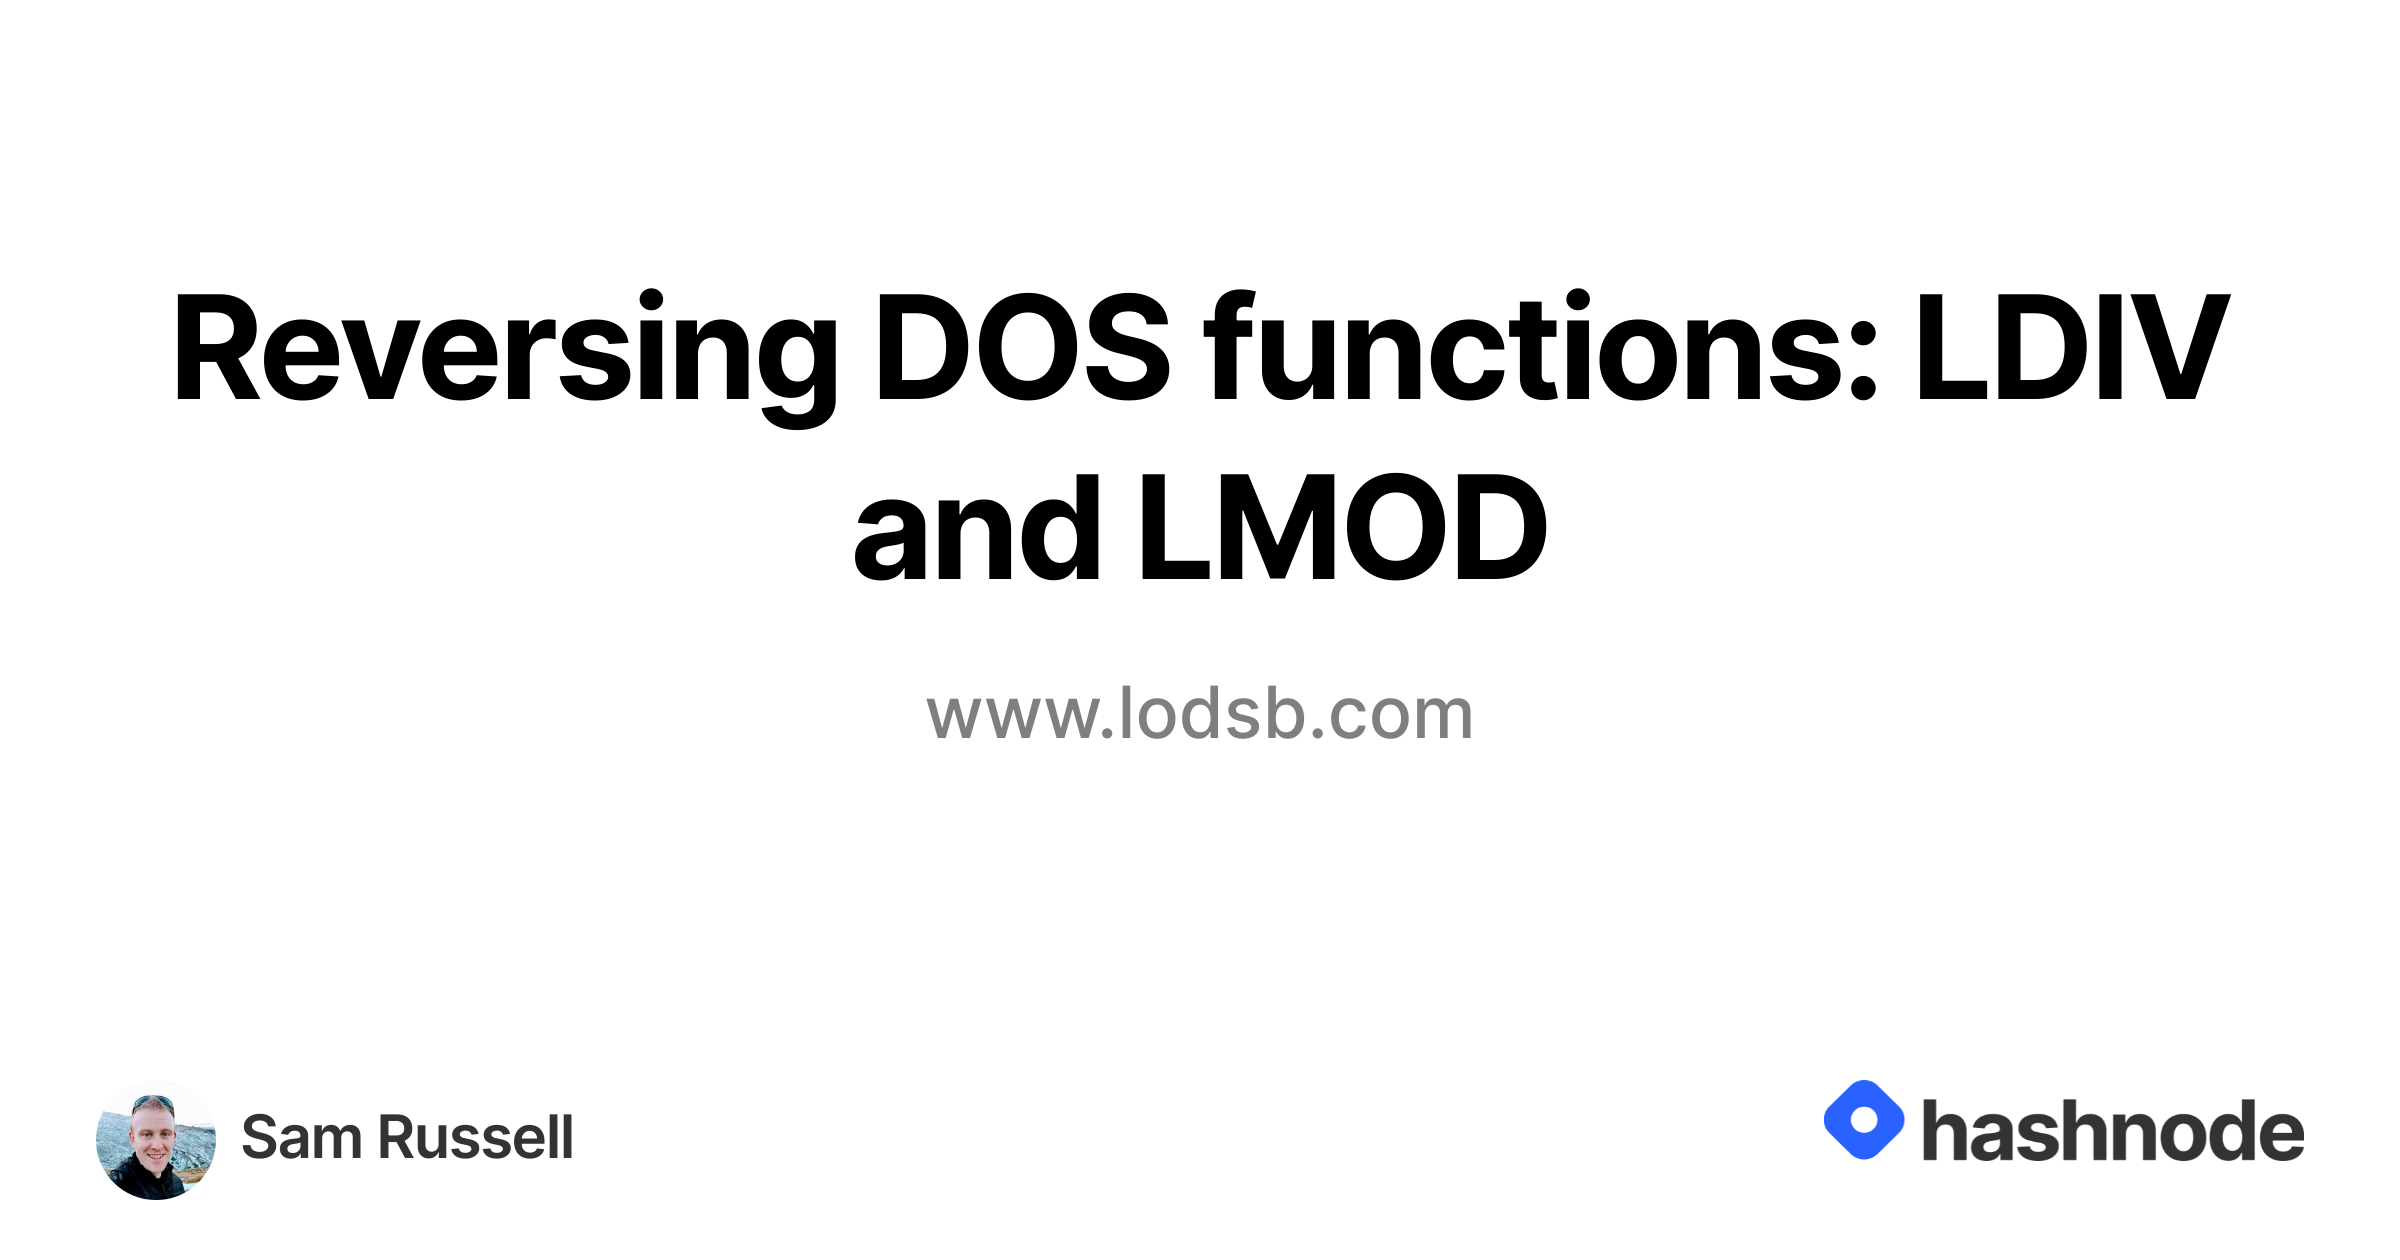 Here we find 4 functions: LDIV, LUDIV, LMOD, and LUMOD, and the standard variations: N_LDIV@, F_LDIV@, N_LUDIV@, F_LUDIV@, N_LMOD@, F_LMOD@, N_LUMOD@,